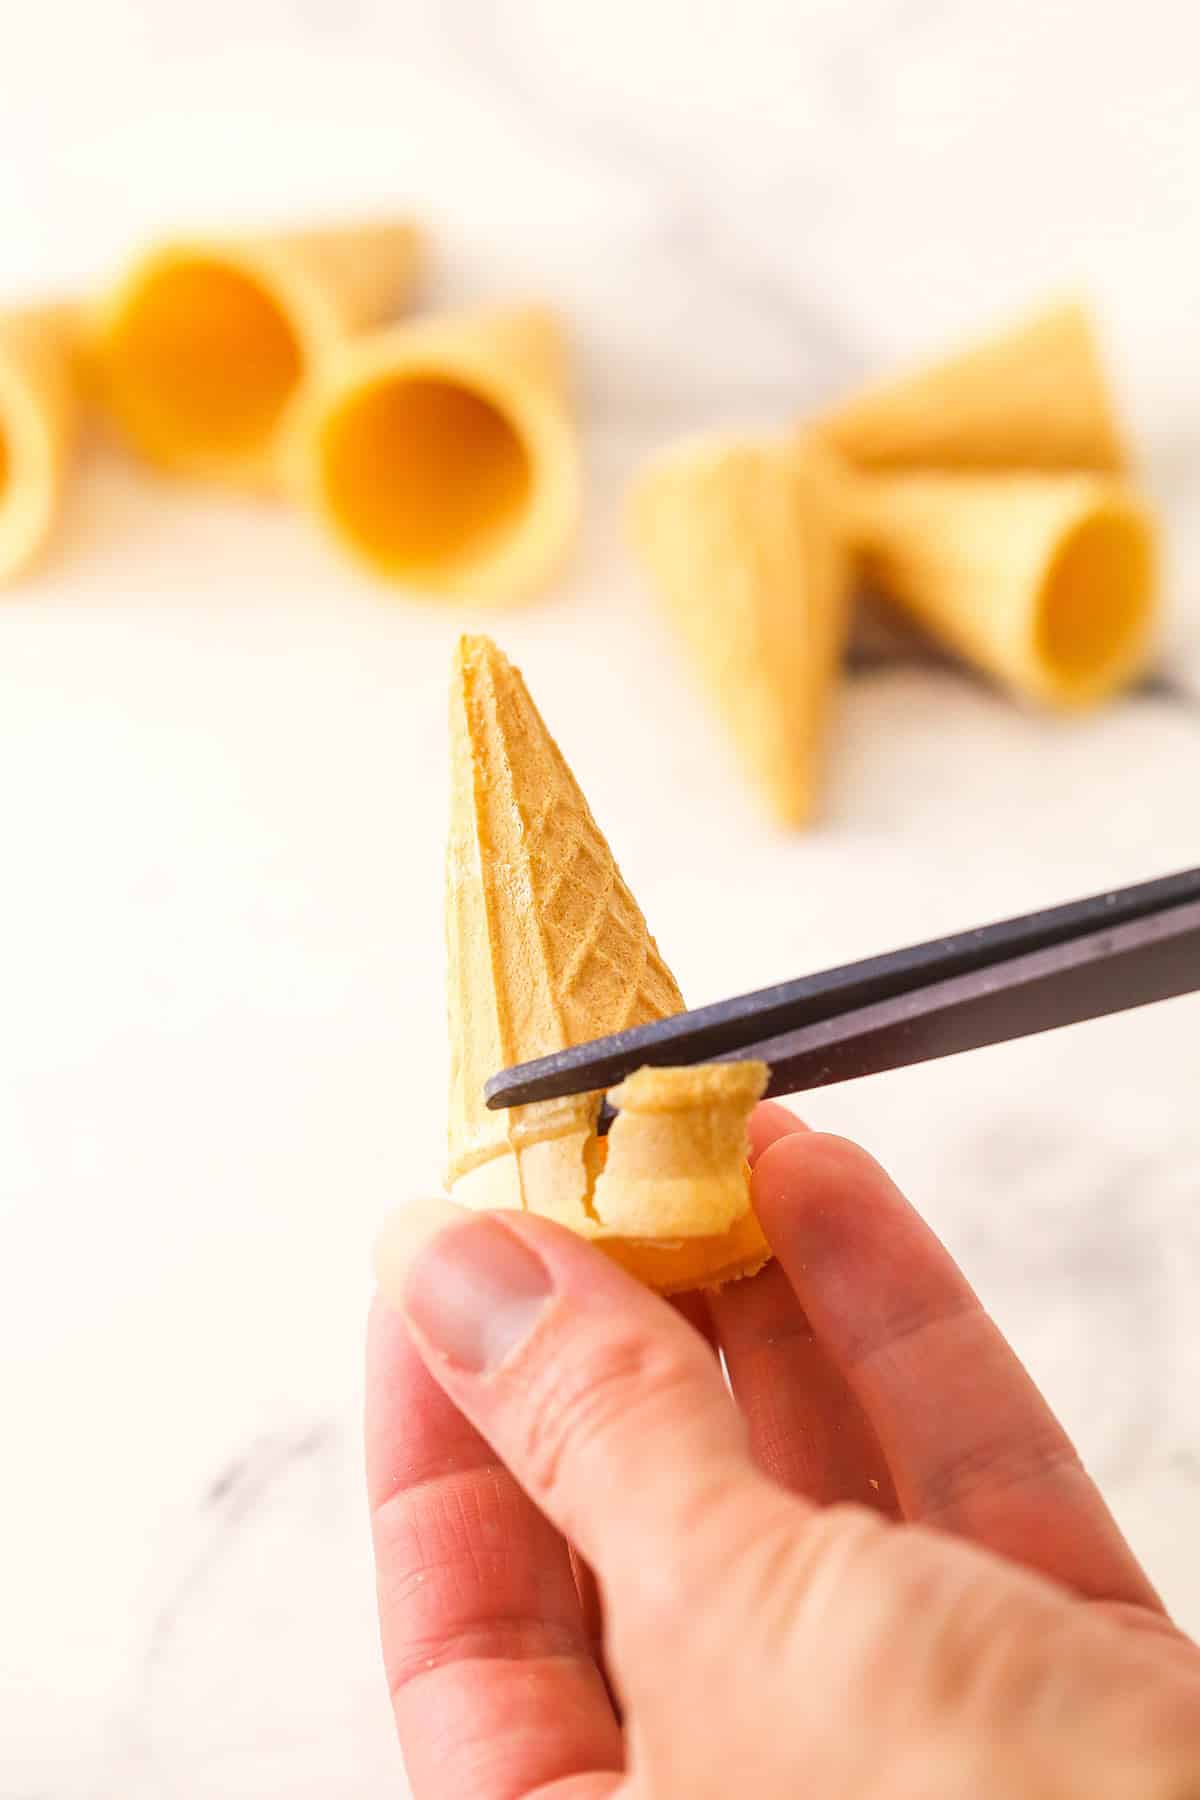 Snipping off the whole pointy end from the ice cream cone with scissors.